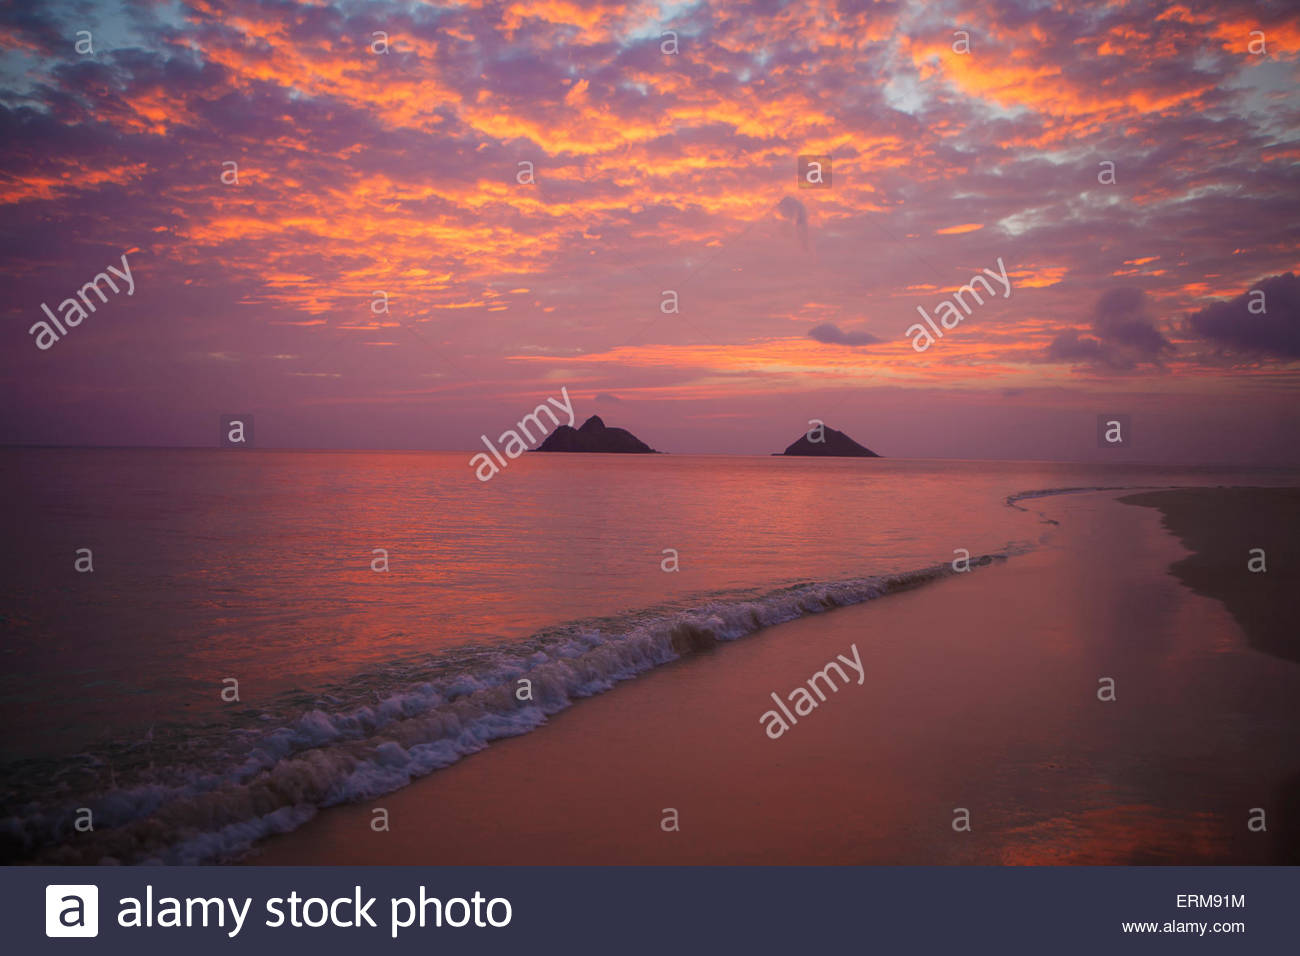 Sunset At Lanikai Beach With Mokuluas Islands In The Background